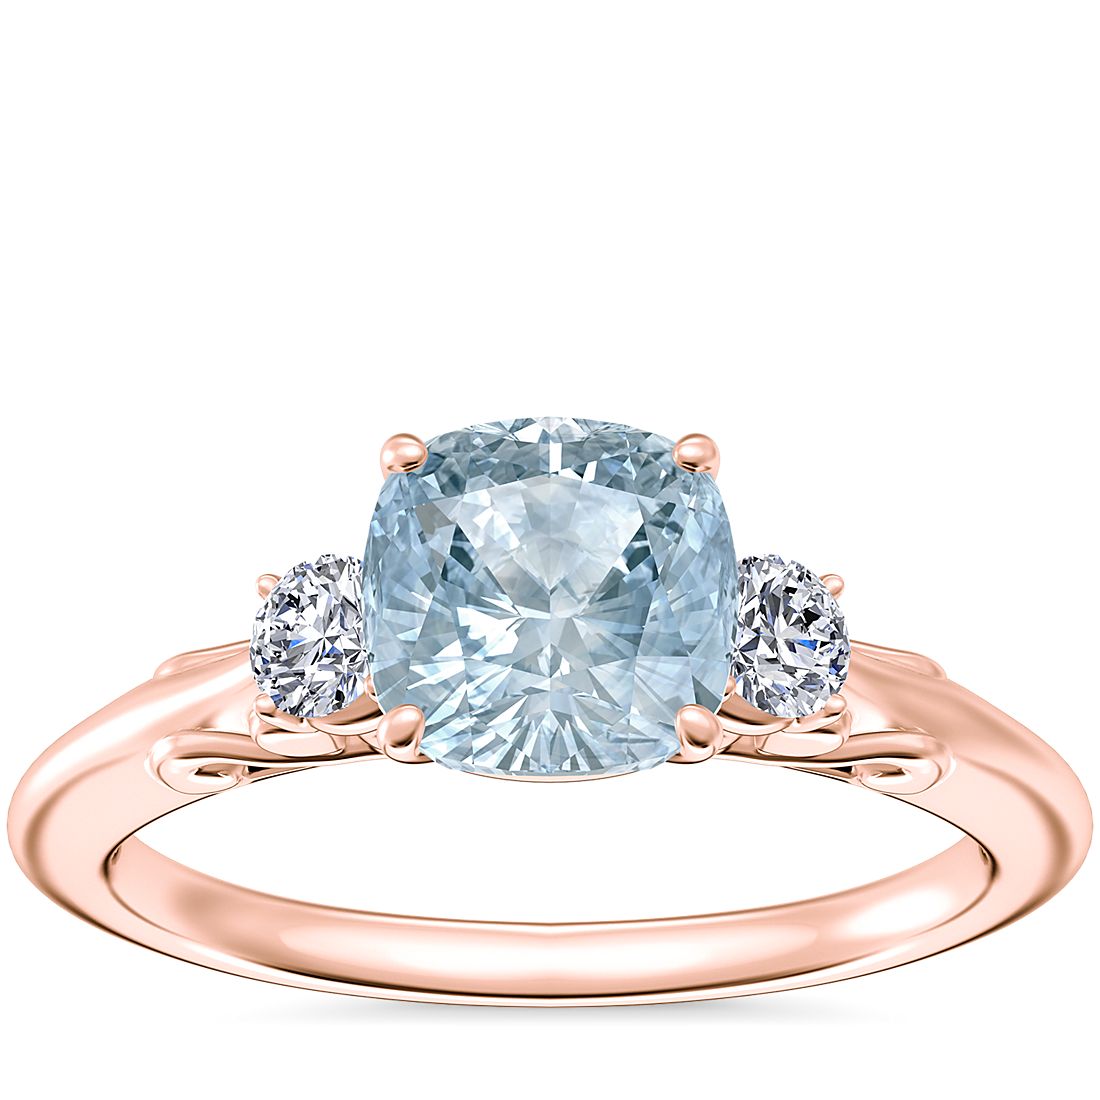 Vintage Three Stone Engagement Ring with Cushion Aquamarine in 18k Rose Gold (6.5mm)